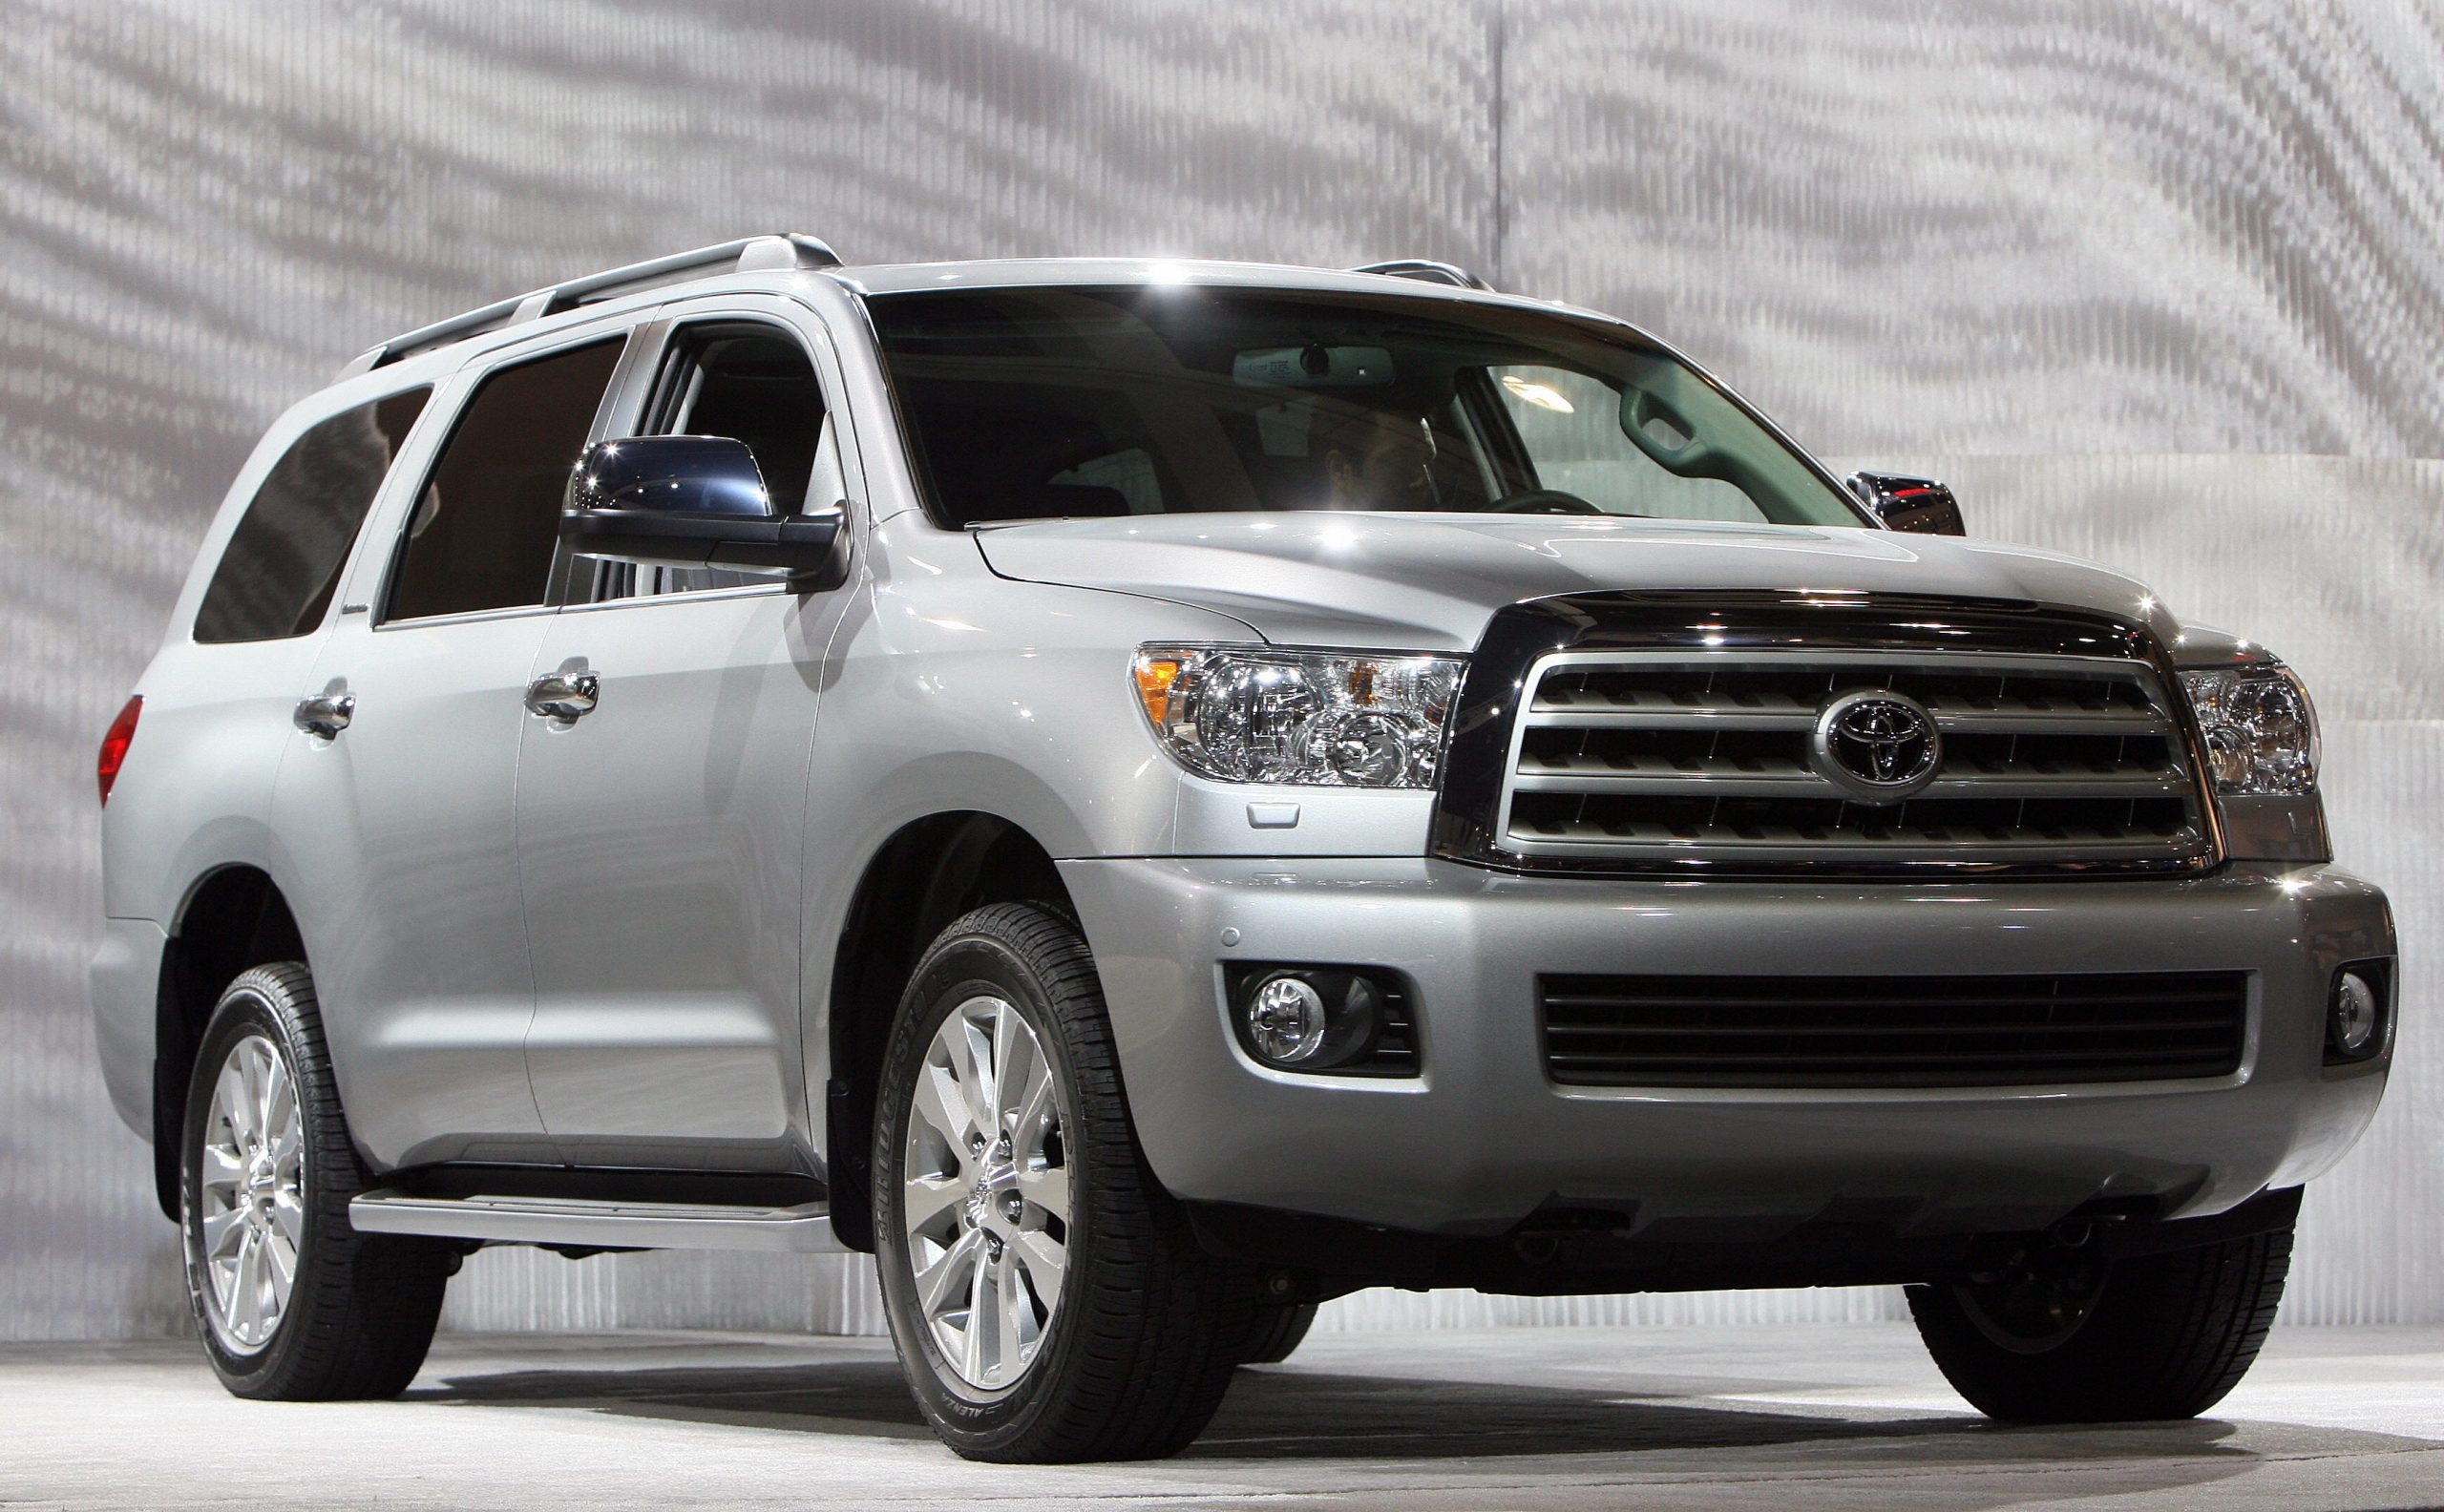 Toyota Sequoia, Model years to avoid, Smart purchasing choices, 2560x1590 HD Desktop